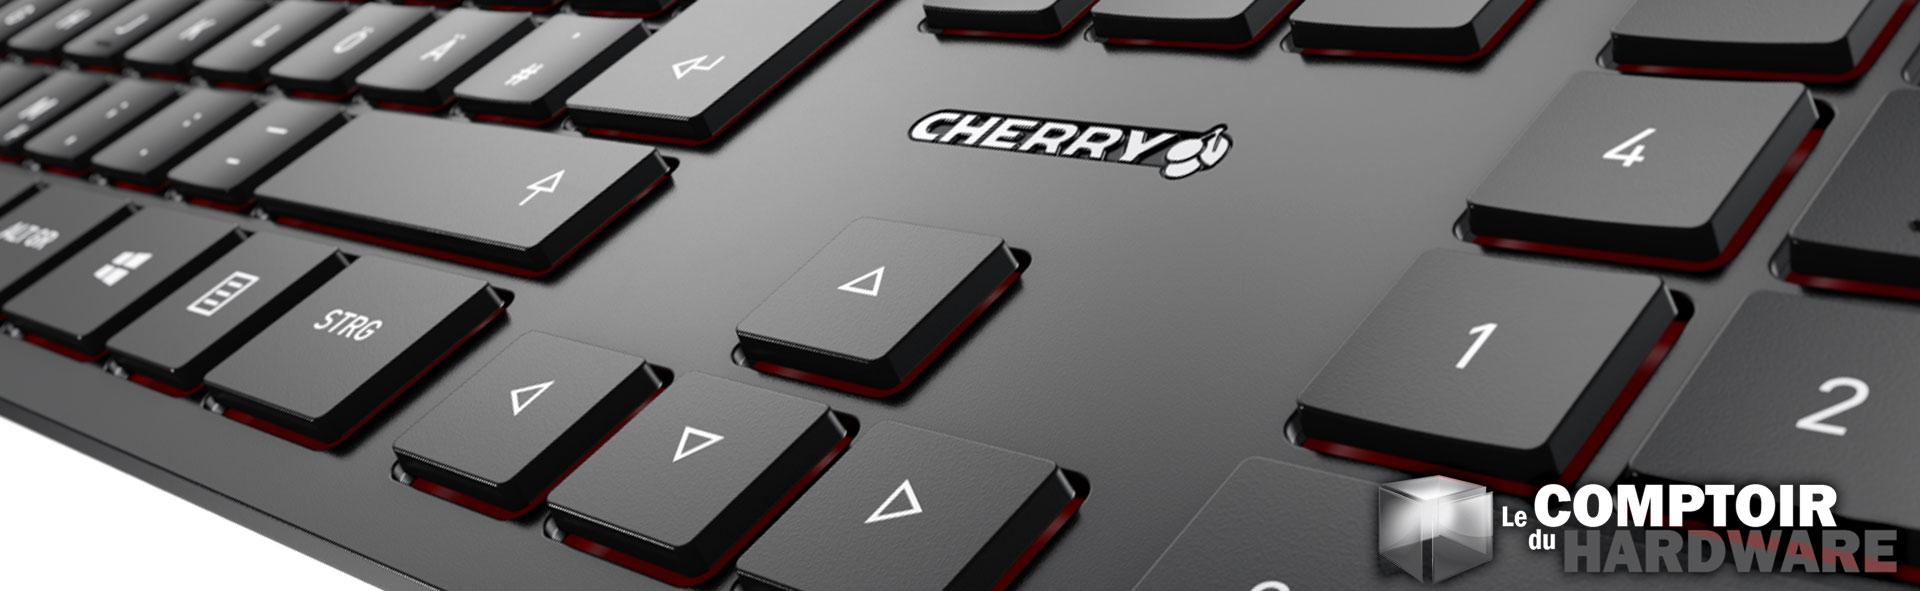 review cherry kc6000